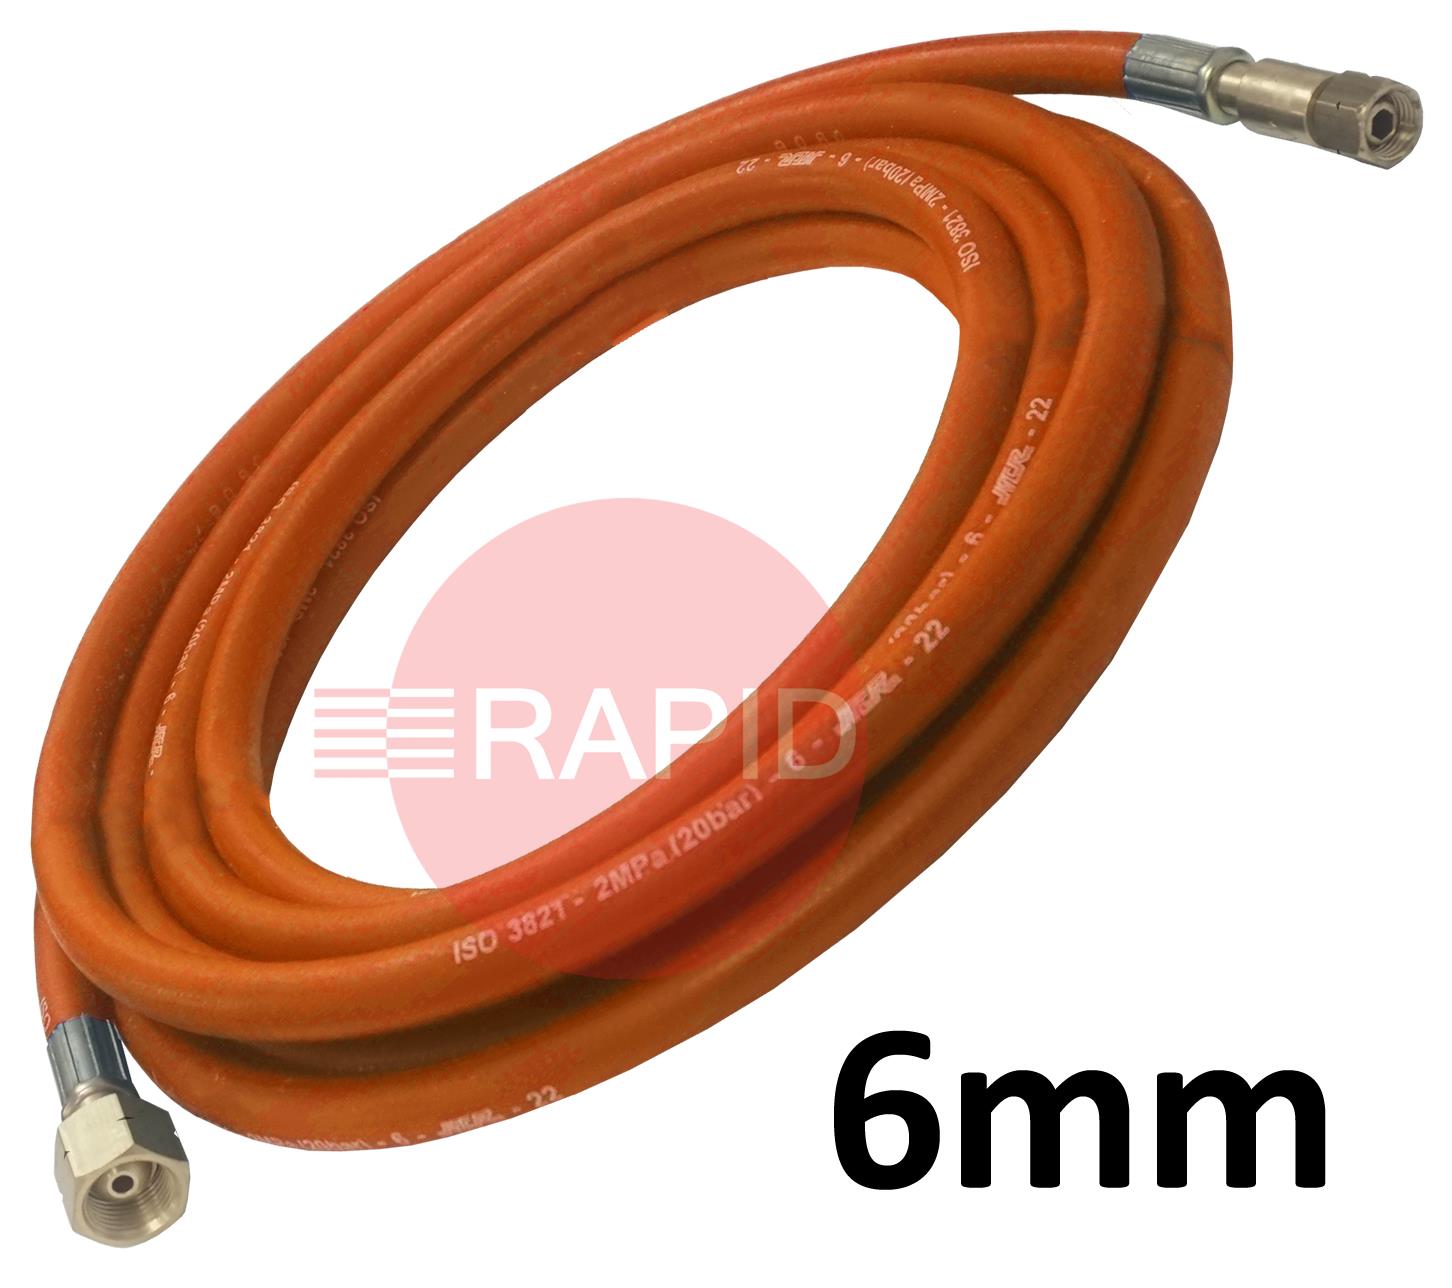 A5137  Fitted Propane Hose. 6mm Bore. G1/4 Check Valve & G3/8 Regulator Connection - 5m